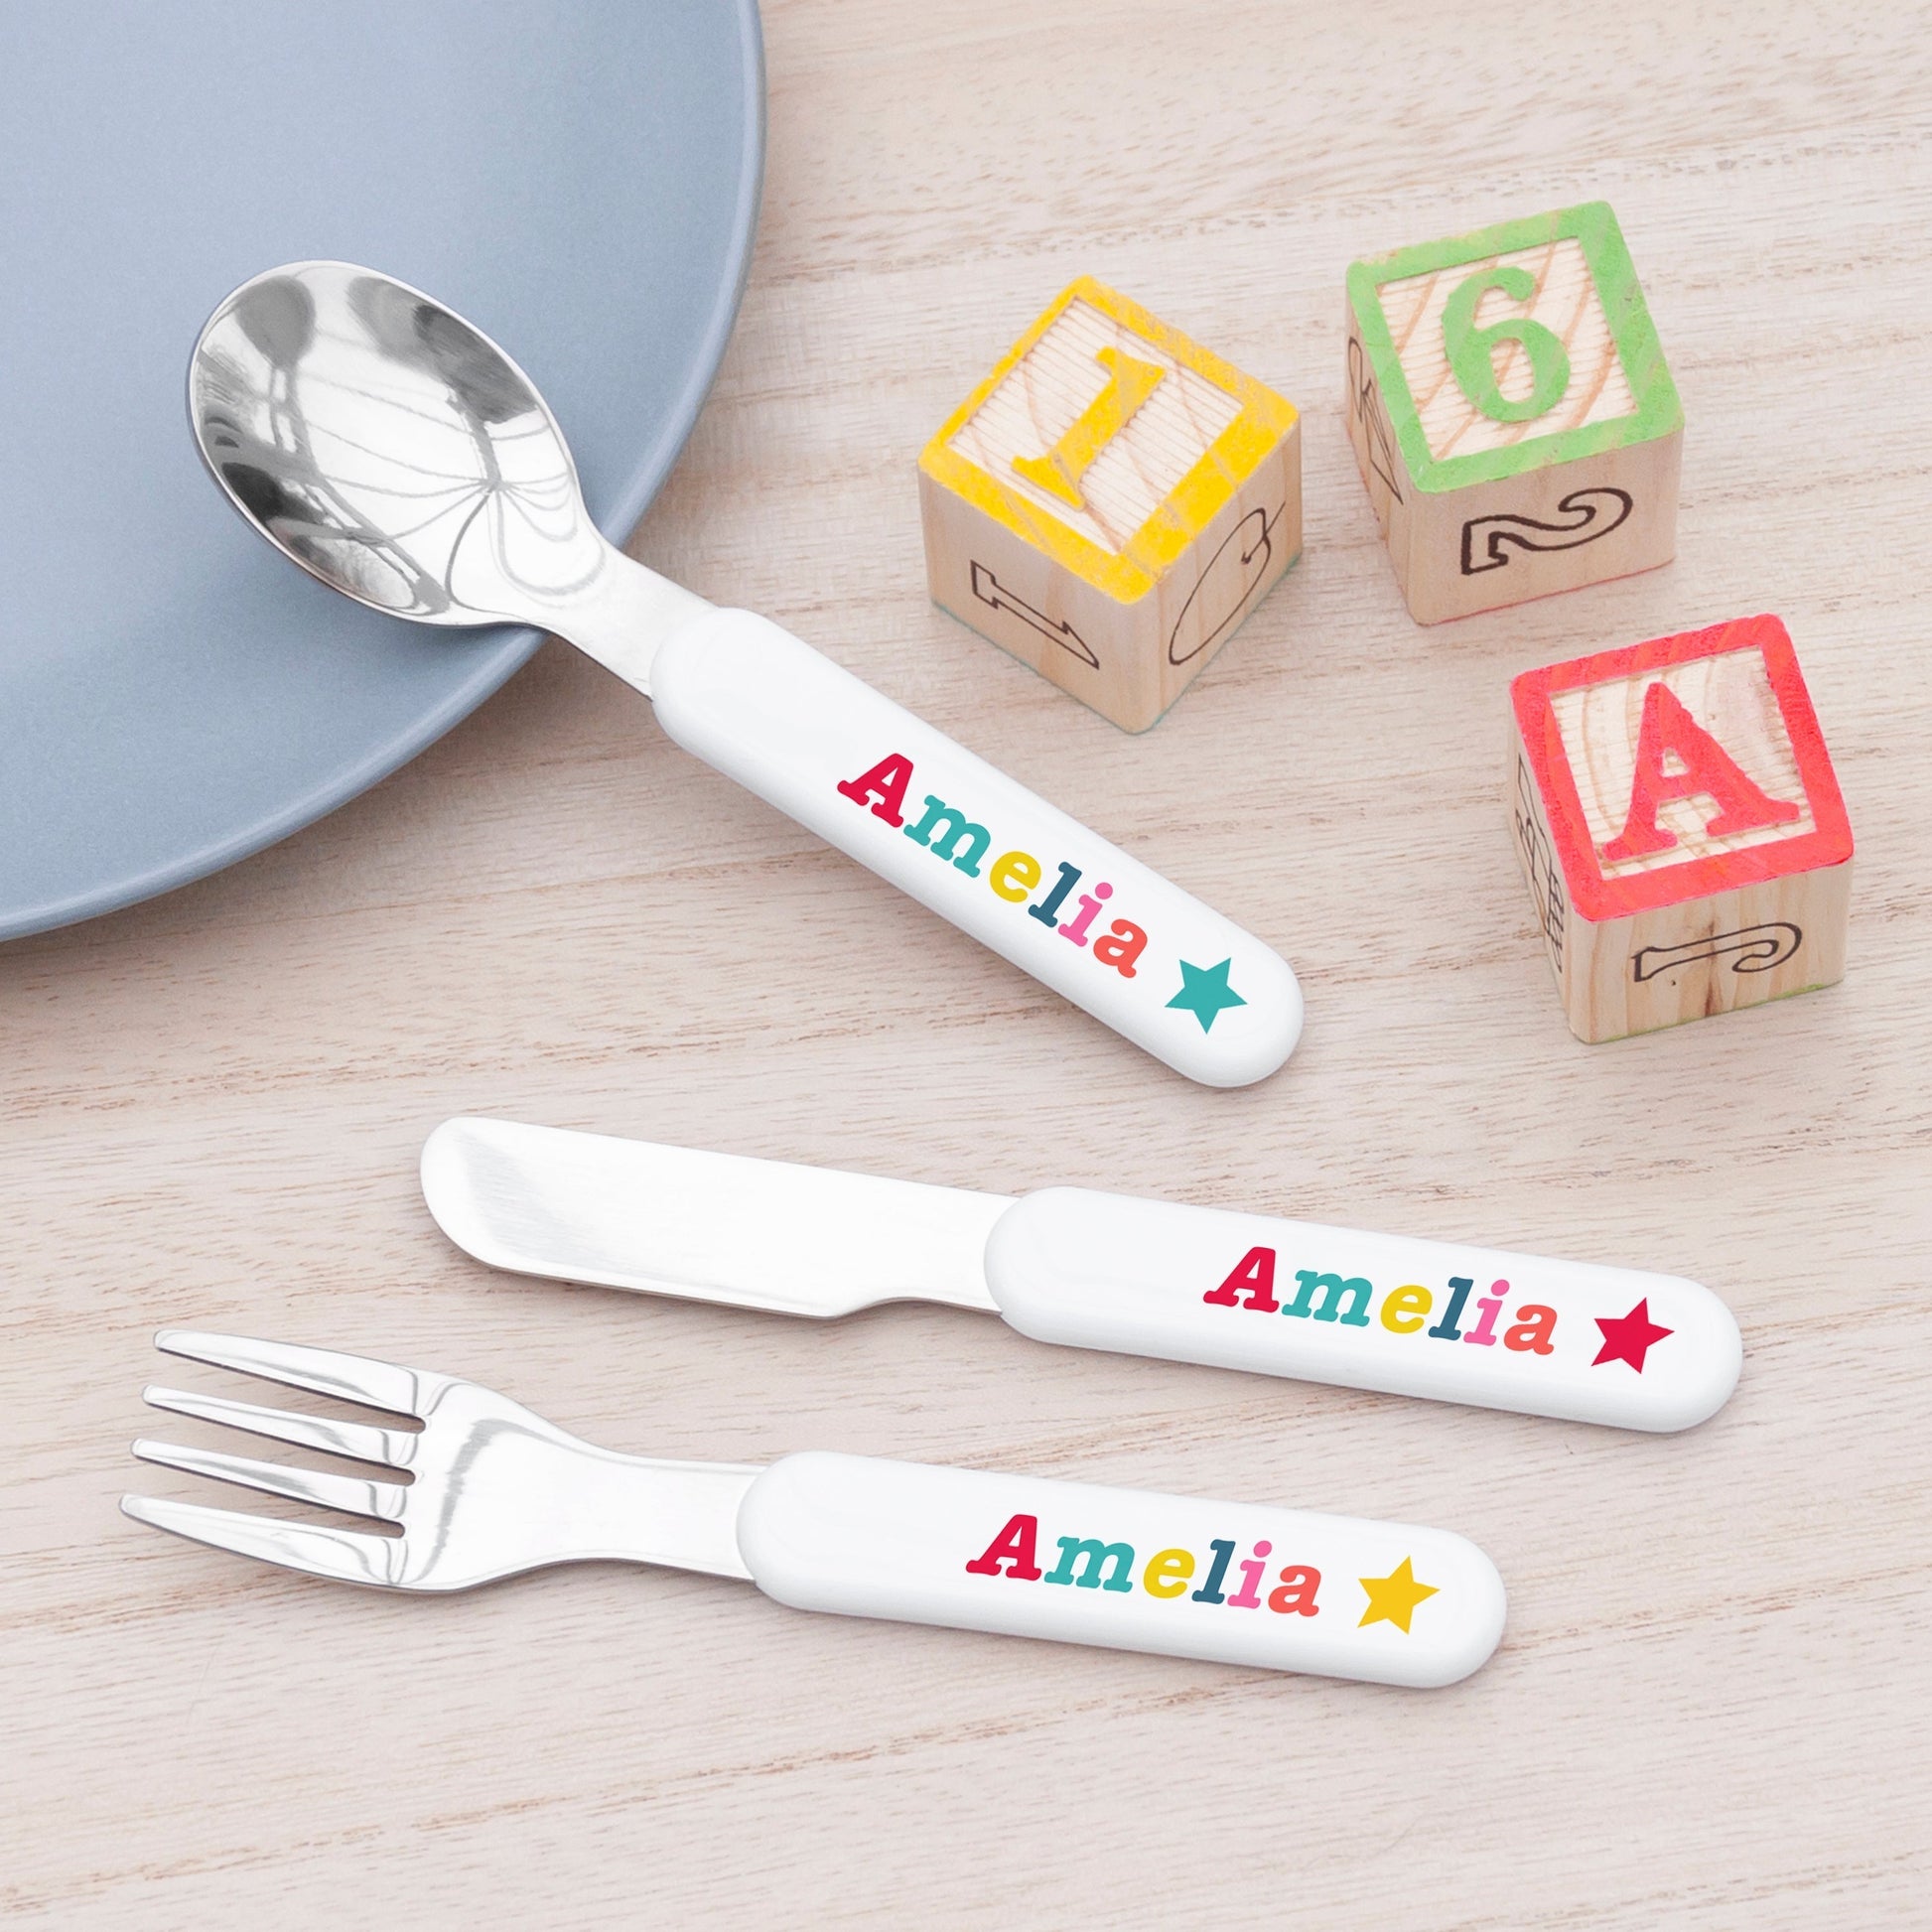 Personalized Metal Cutlery Sets - Personalized Kid's Circus Metal Cutlery Set 